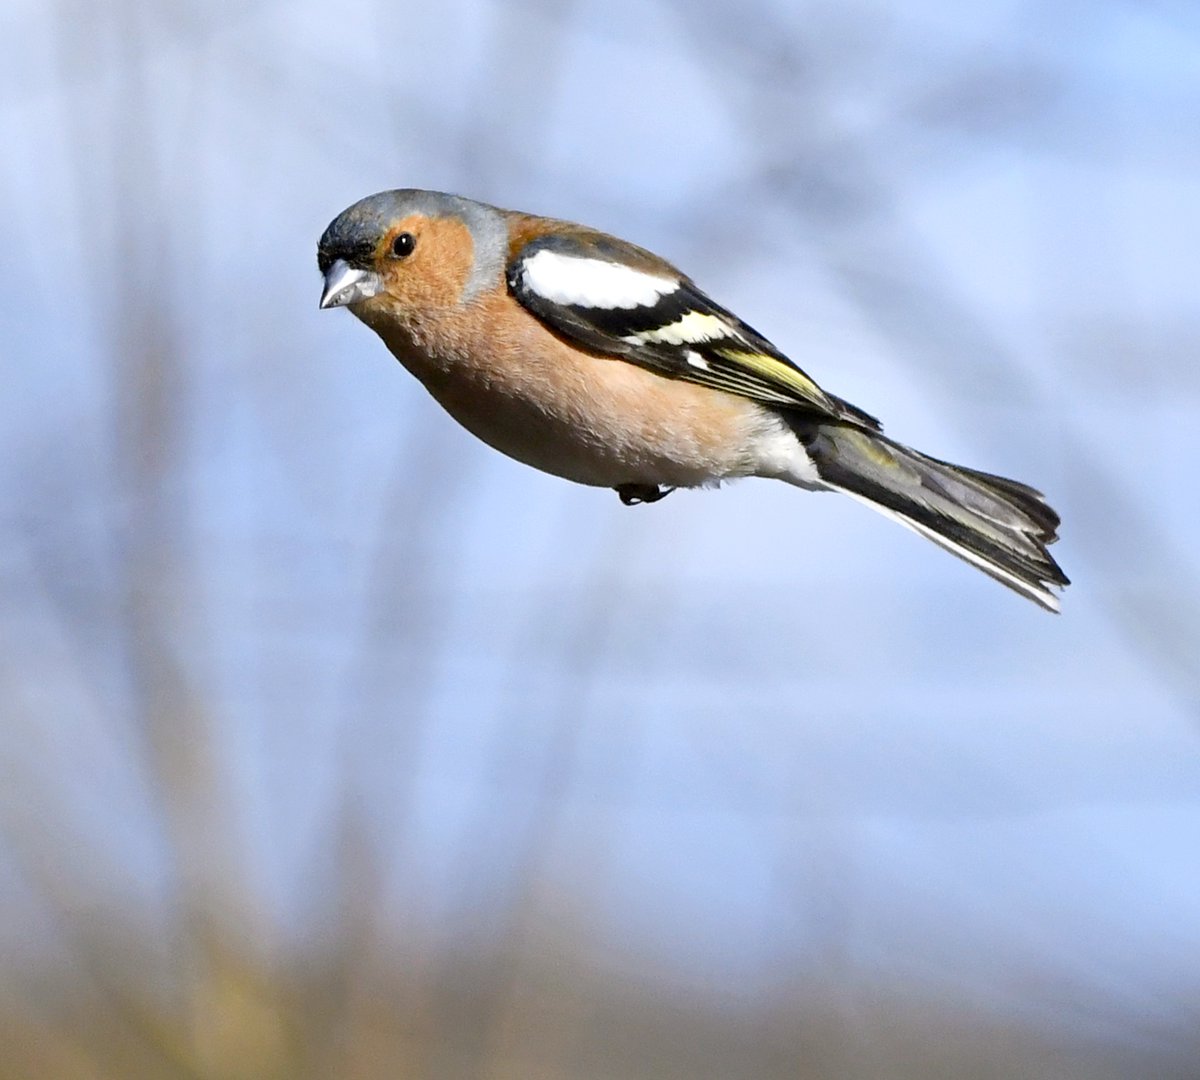 I'm starting to get the feeling the birds are on my side, and deviate their flight trajectory when launched at me by my attackers! This male Chaffinch is a case in point, turning slightly in mid-air and giving me a knowing side glance as it sailed harmlessy by... 